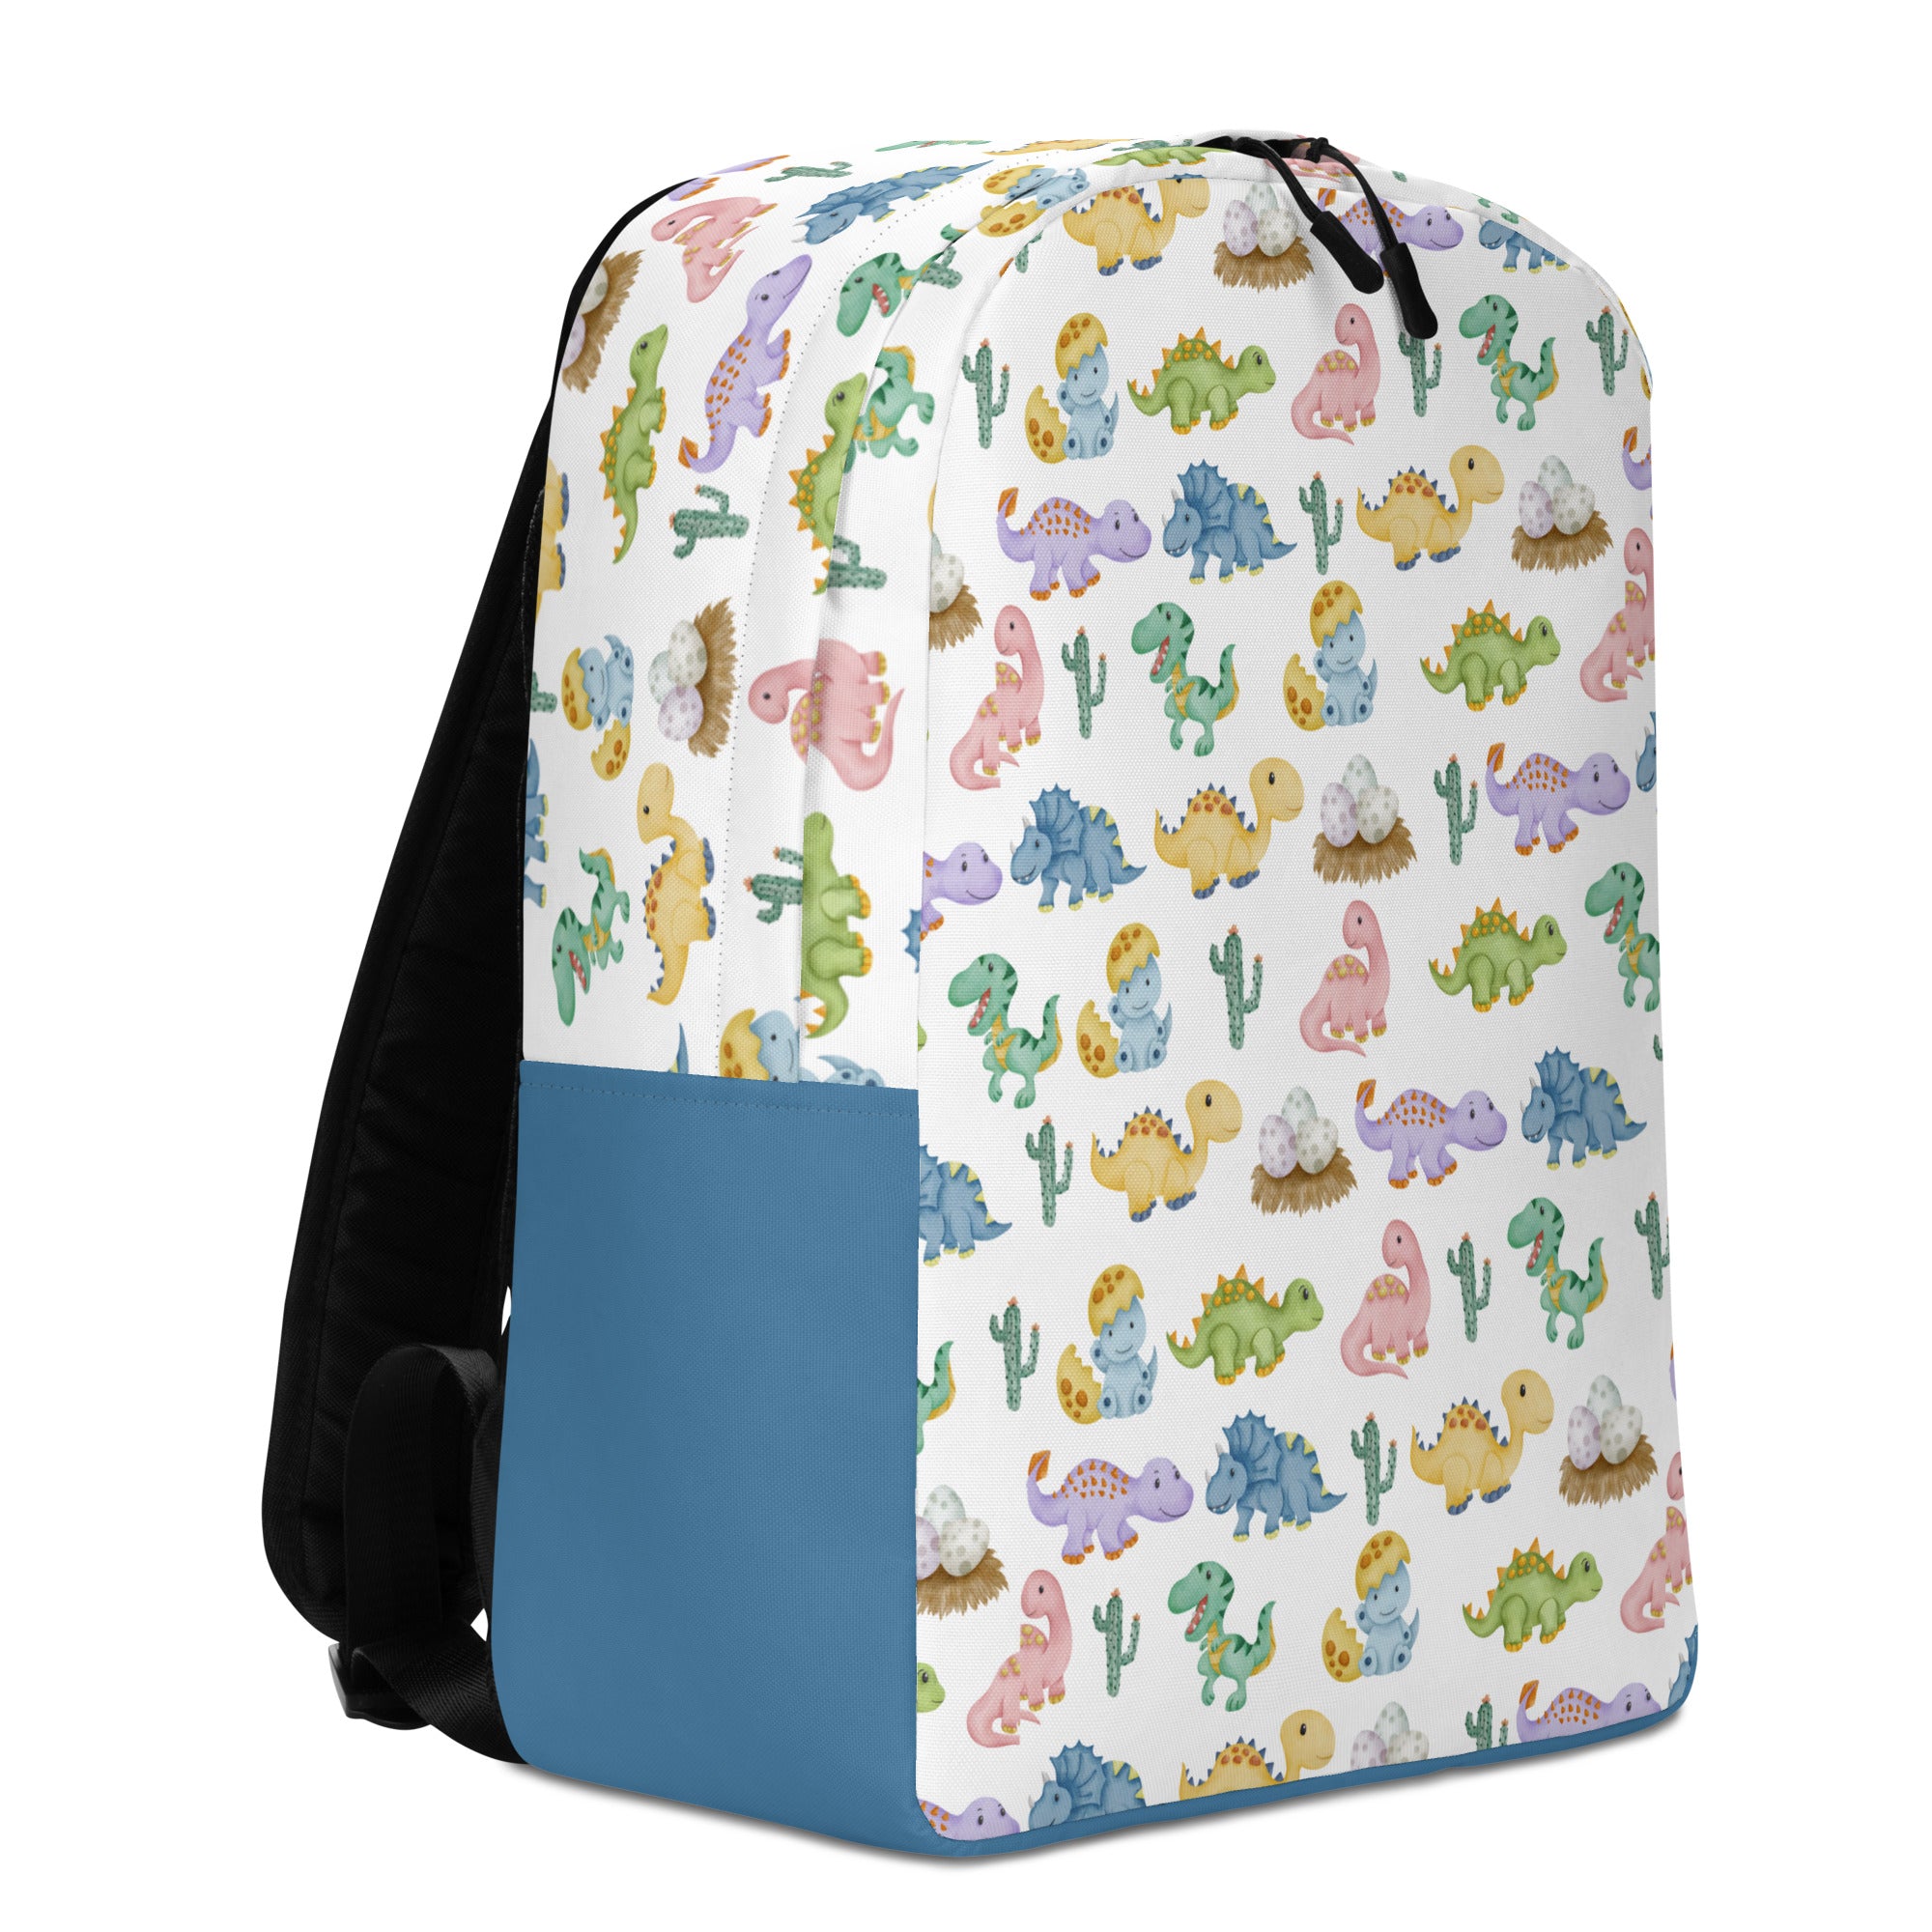 Cute backpack for kids with dinos